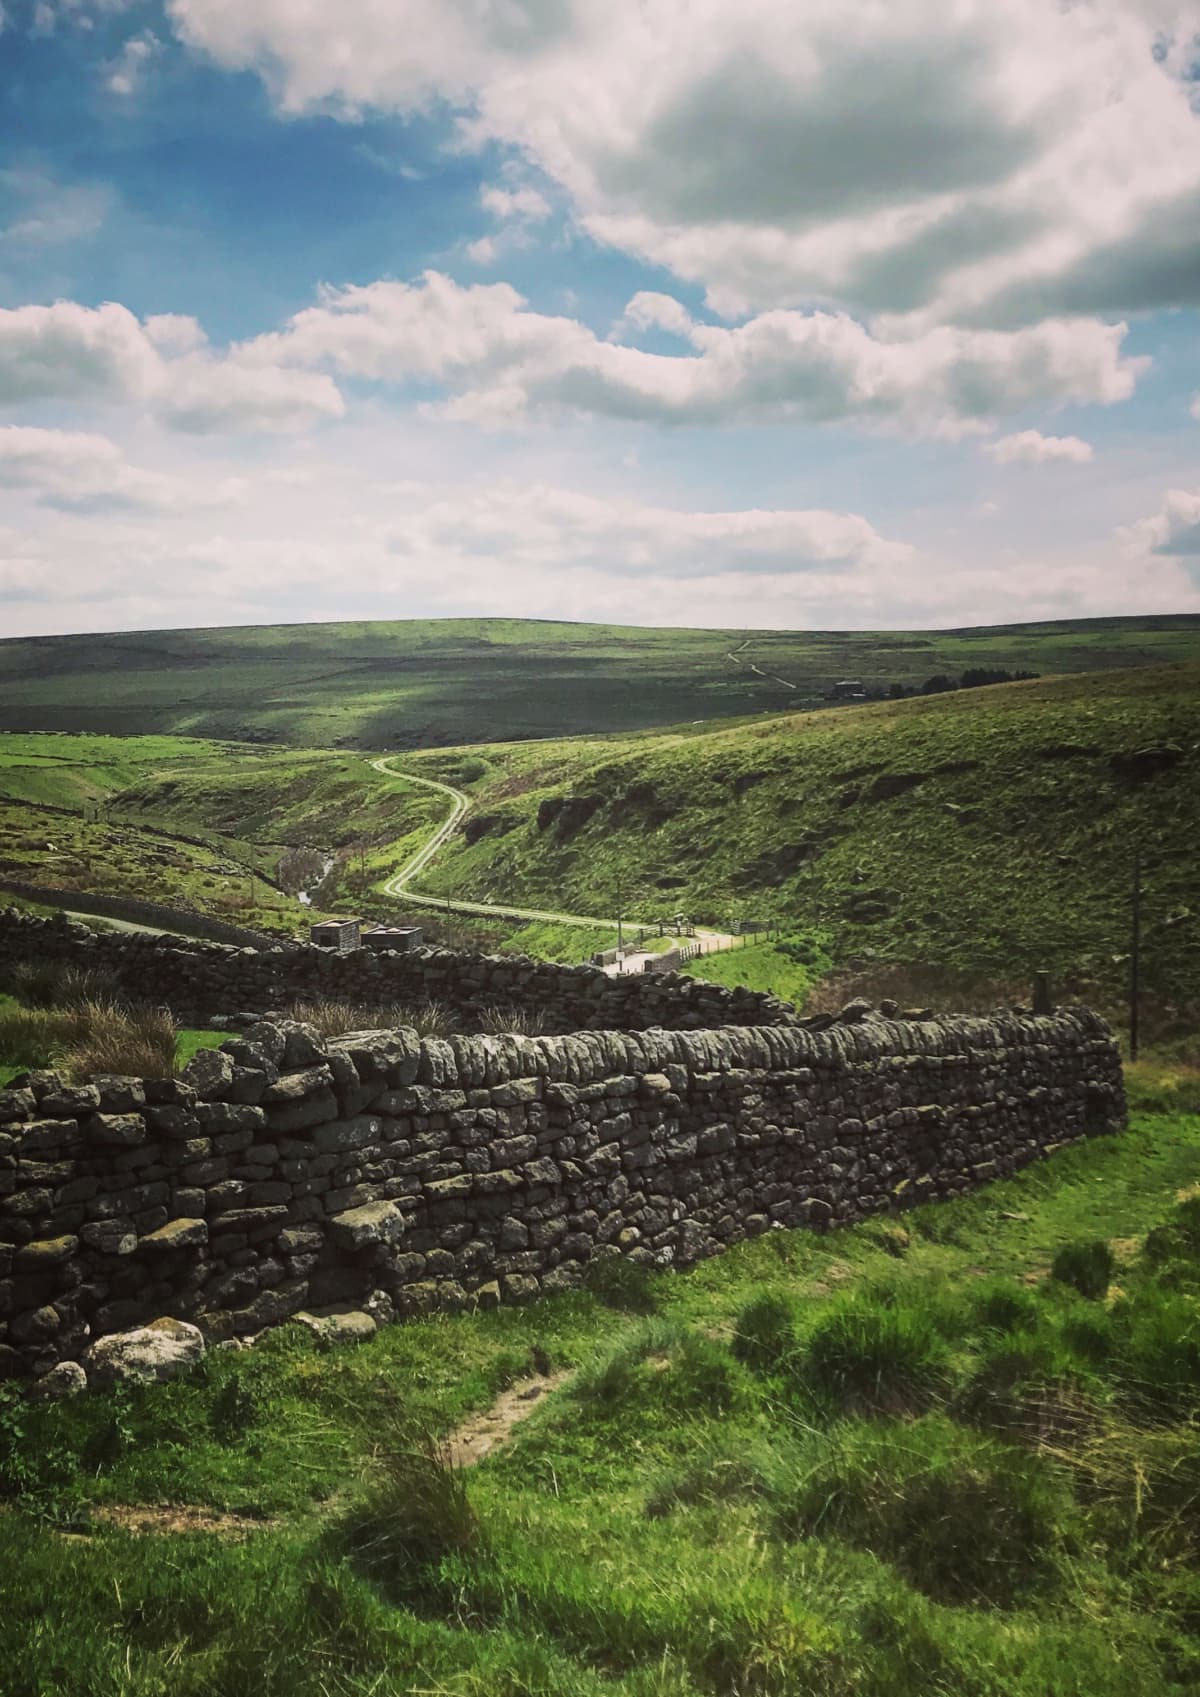 A view of the West Yorkshire Calderdale along the Pennine Way